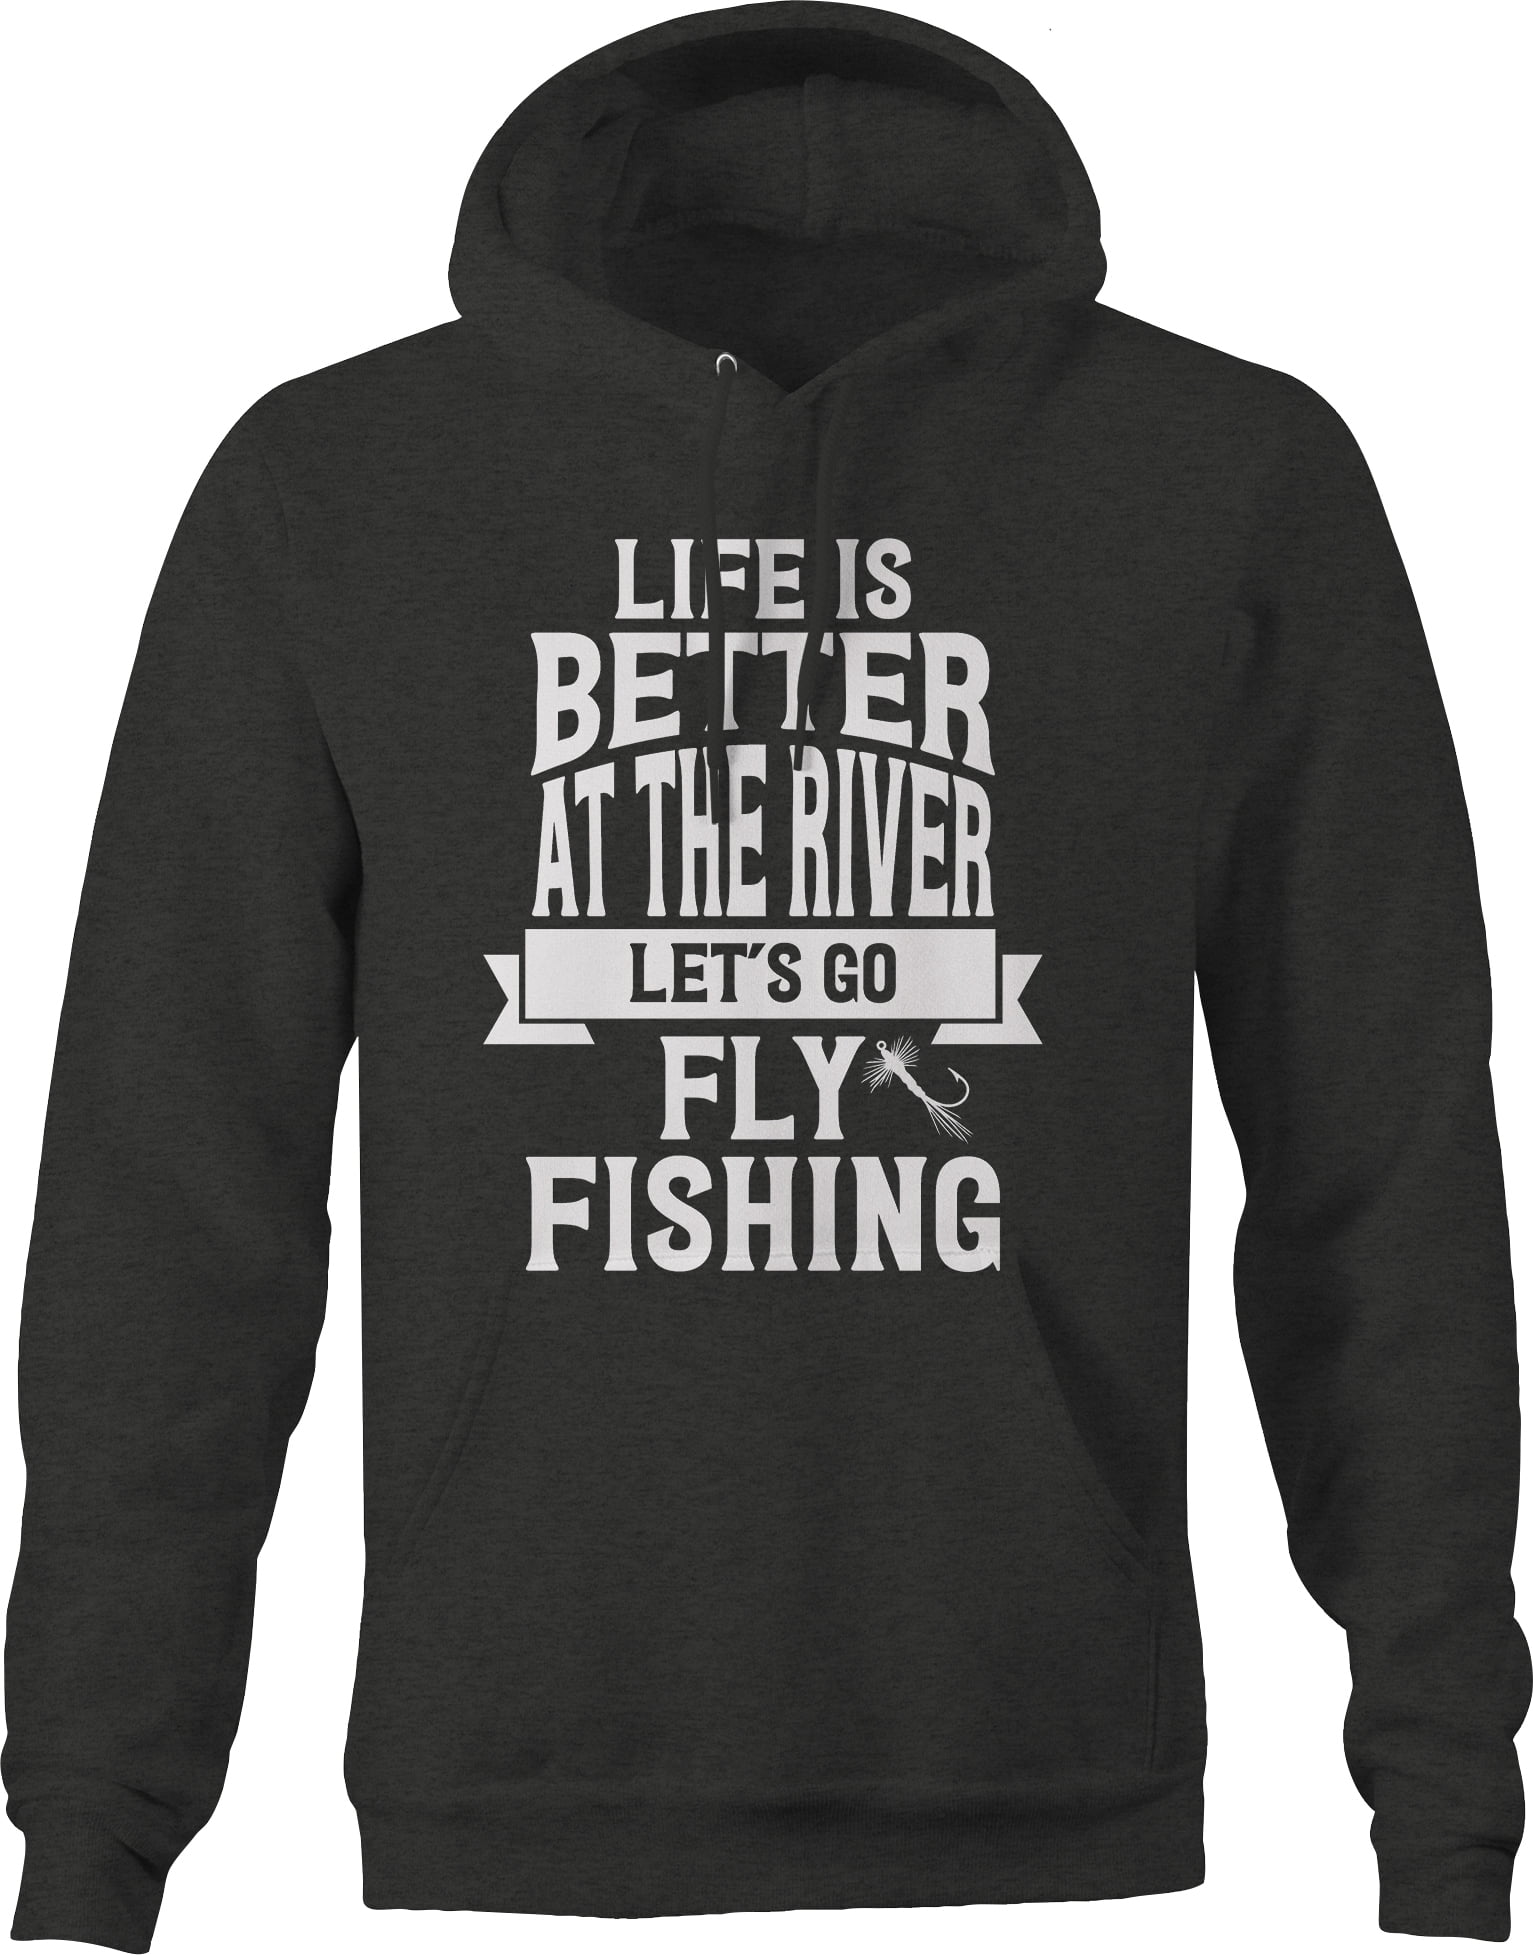 Life is Better at The River Fly Fishing Hoodie for Big Men 3XL Dark Gray